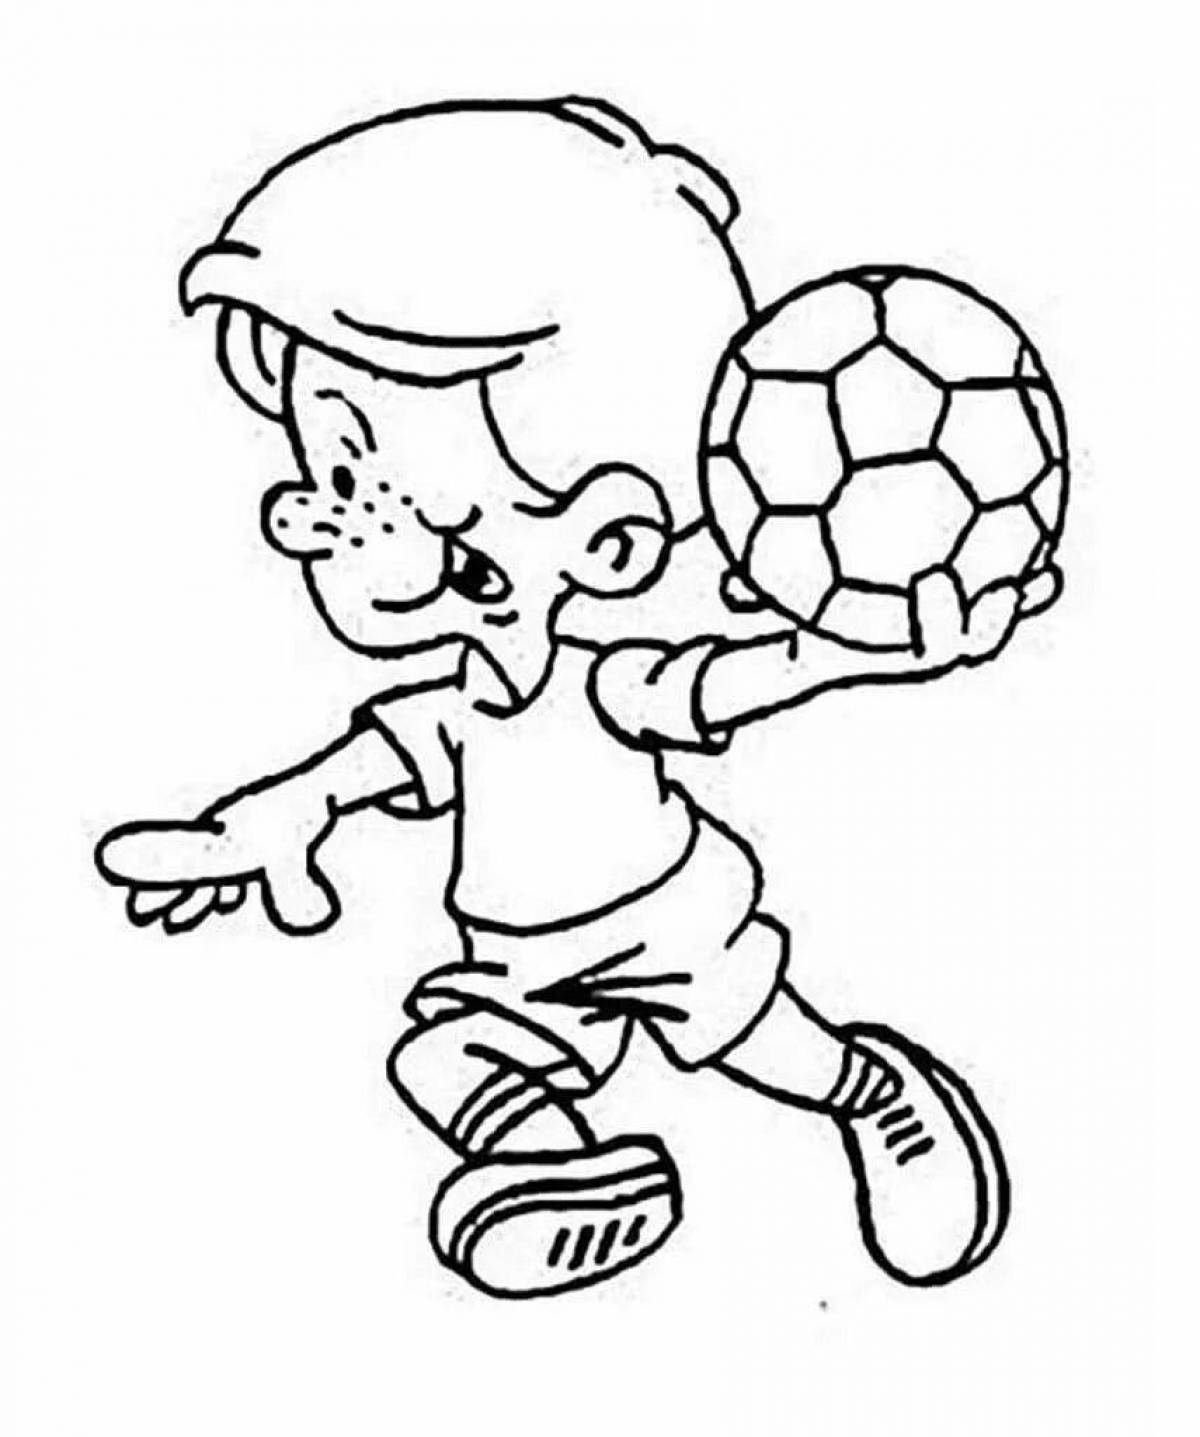 Colored sports coloring book for children